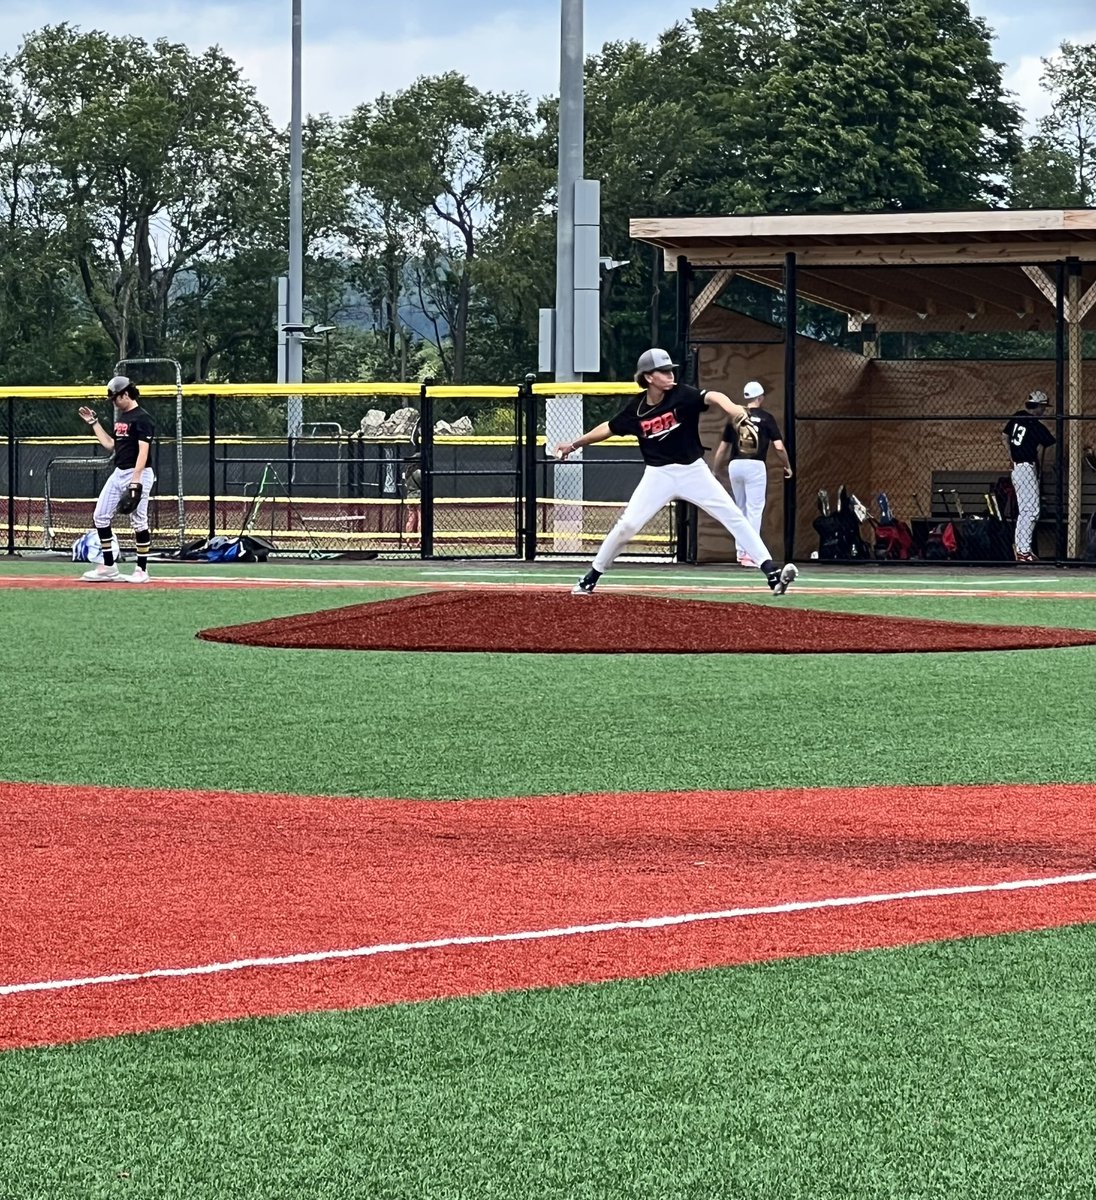 Thank you @PBR_Ontario @GeorgeHalim_ @CamAraujoBB for the invite and two great days of baseball!